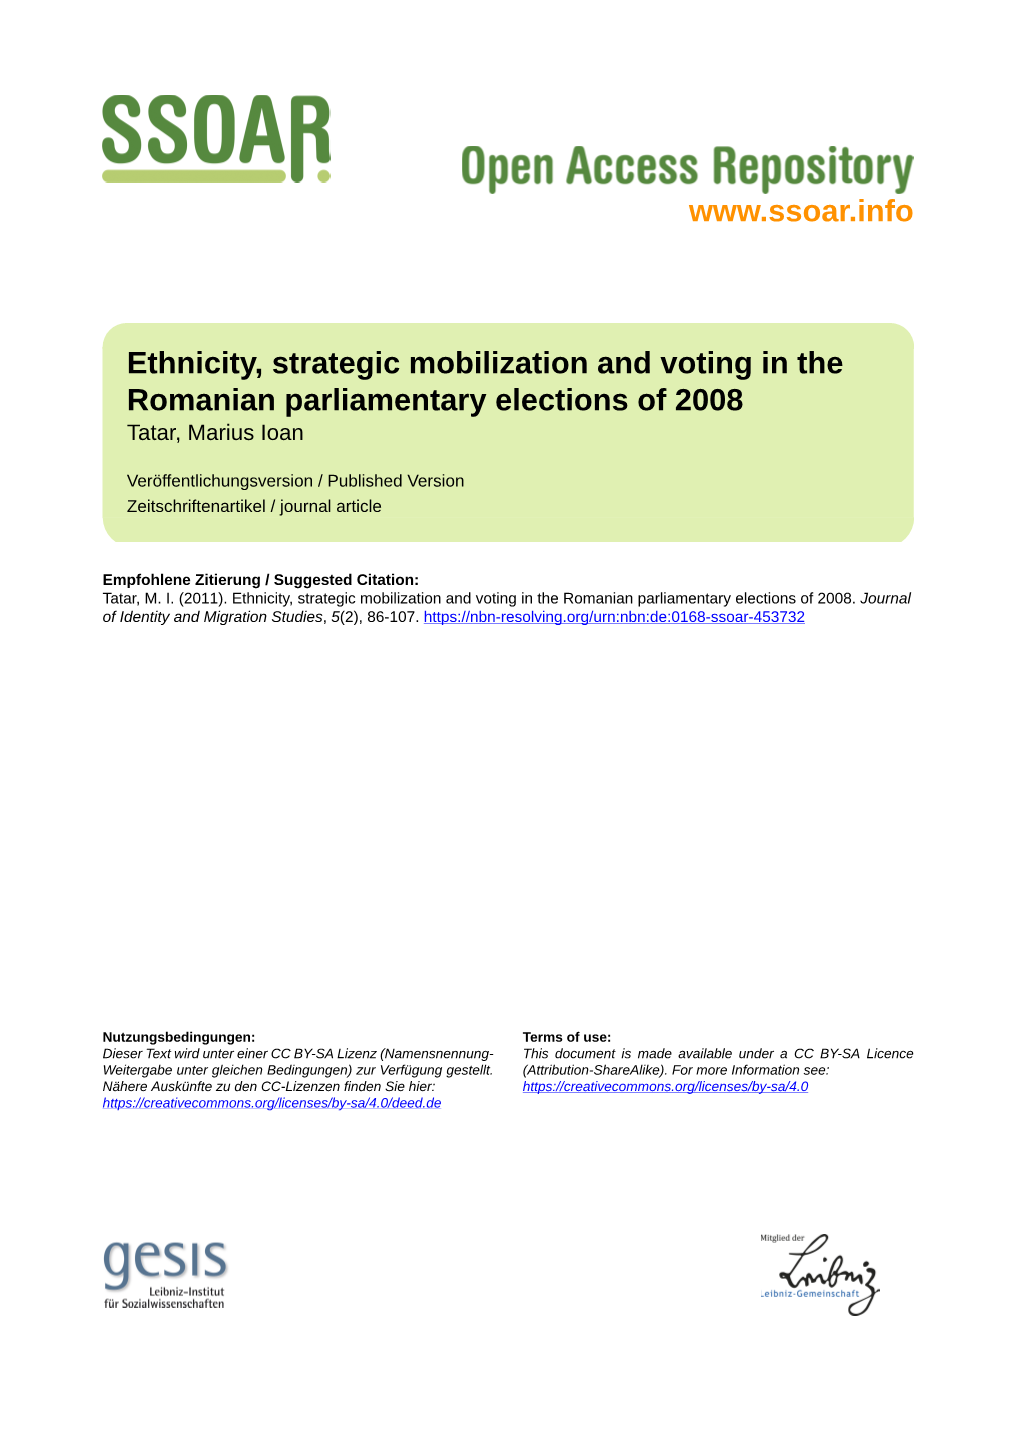 Ethnicity, Strategic Mobilization and Voting in the Romanian Parliamentary Elections of 2008 Tatar, Marius Ioan